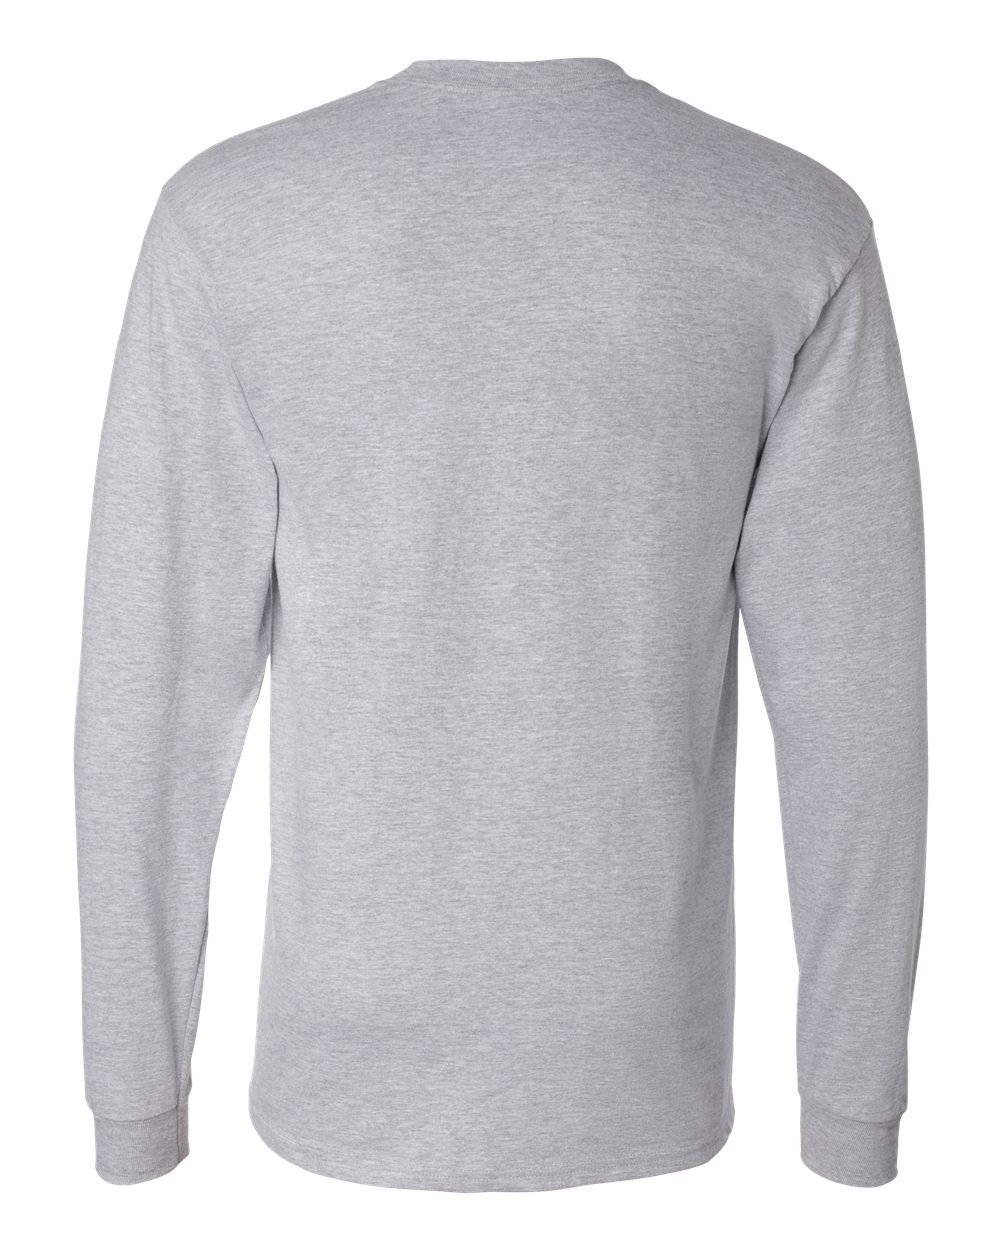 Hanes Mens Blank Cotton Beefy-T Long Sleeve T Shirt 5186 up to 3XL | eBay